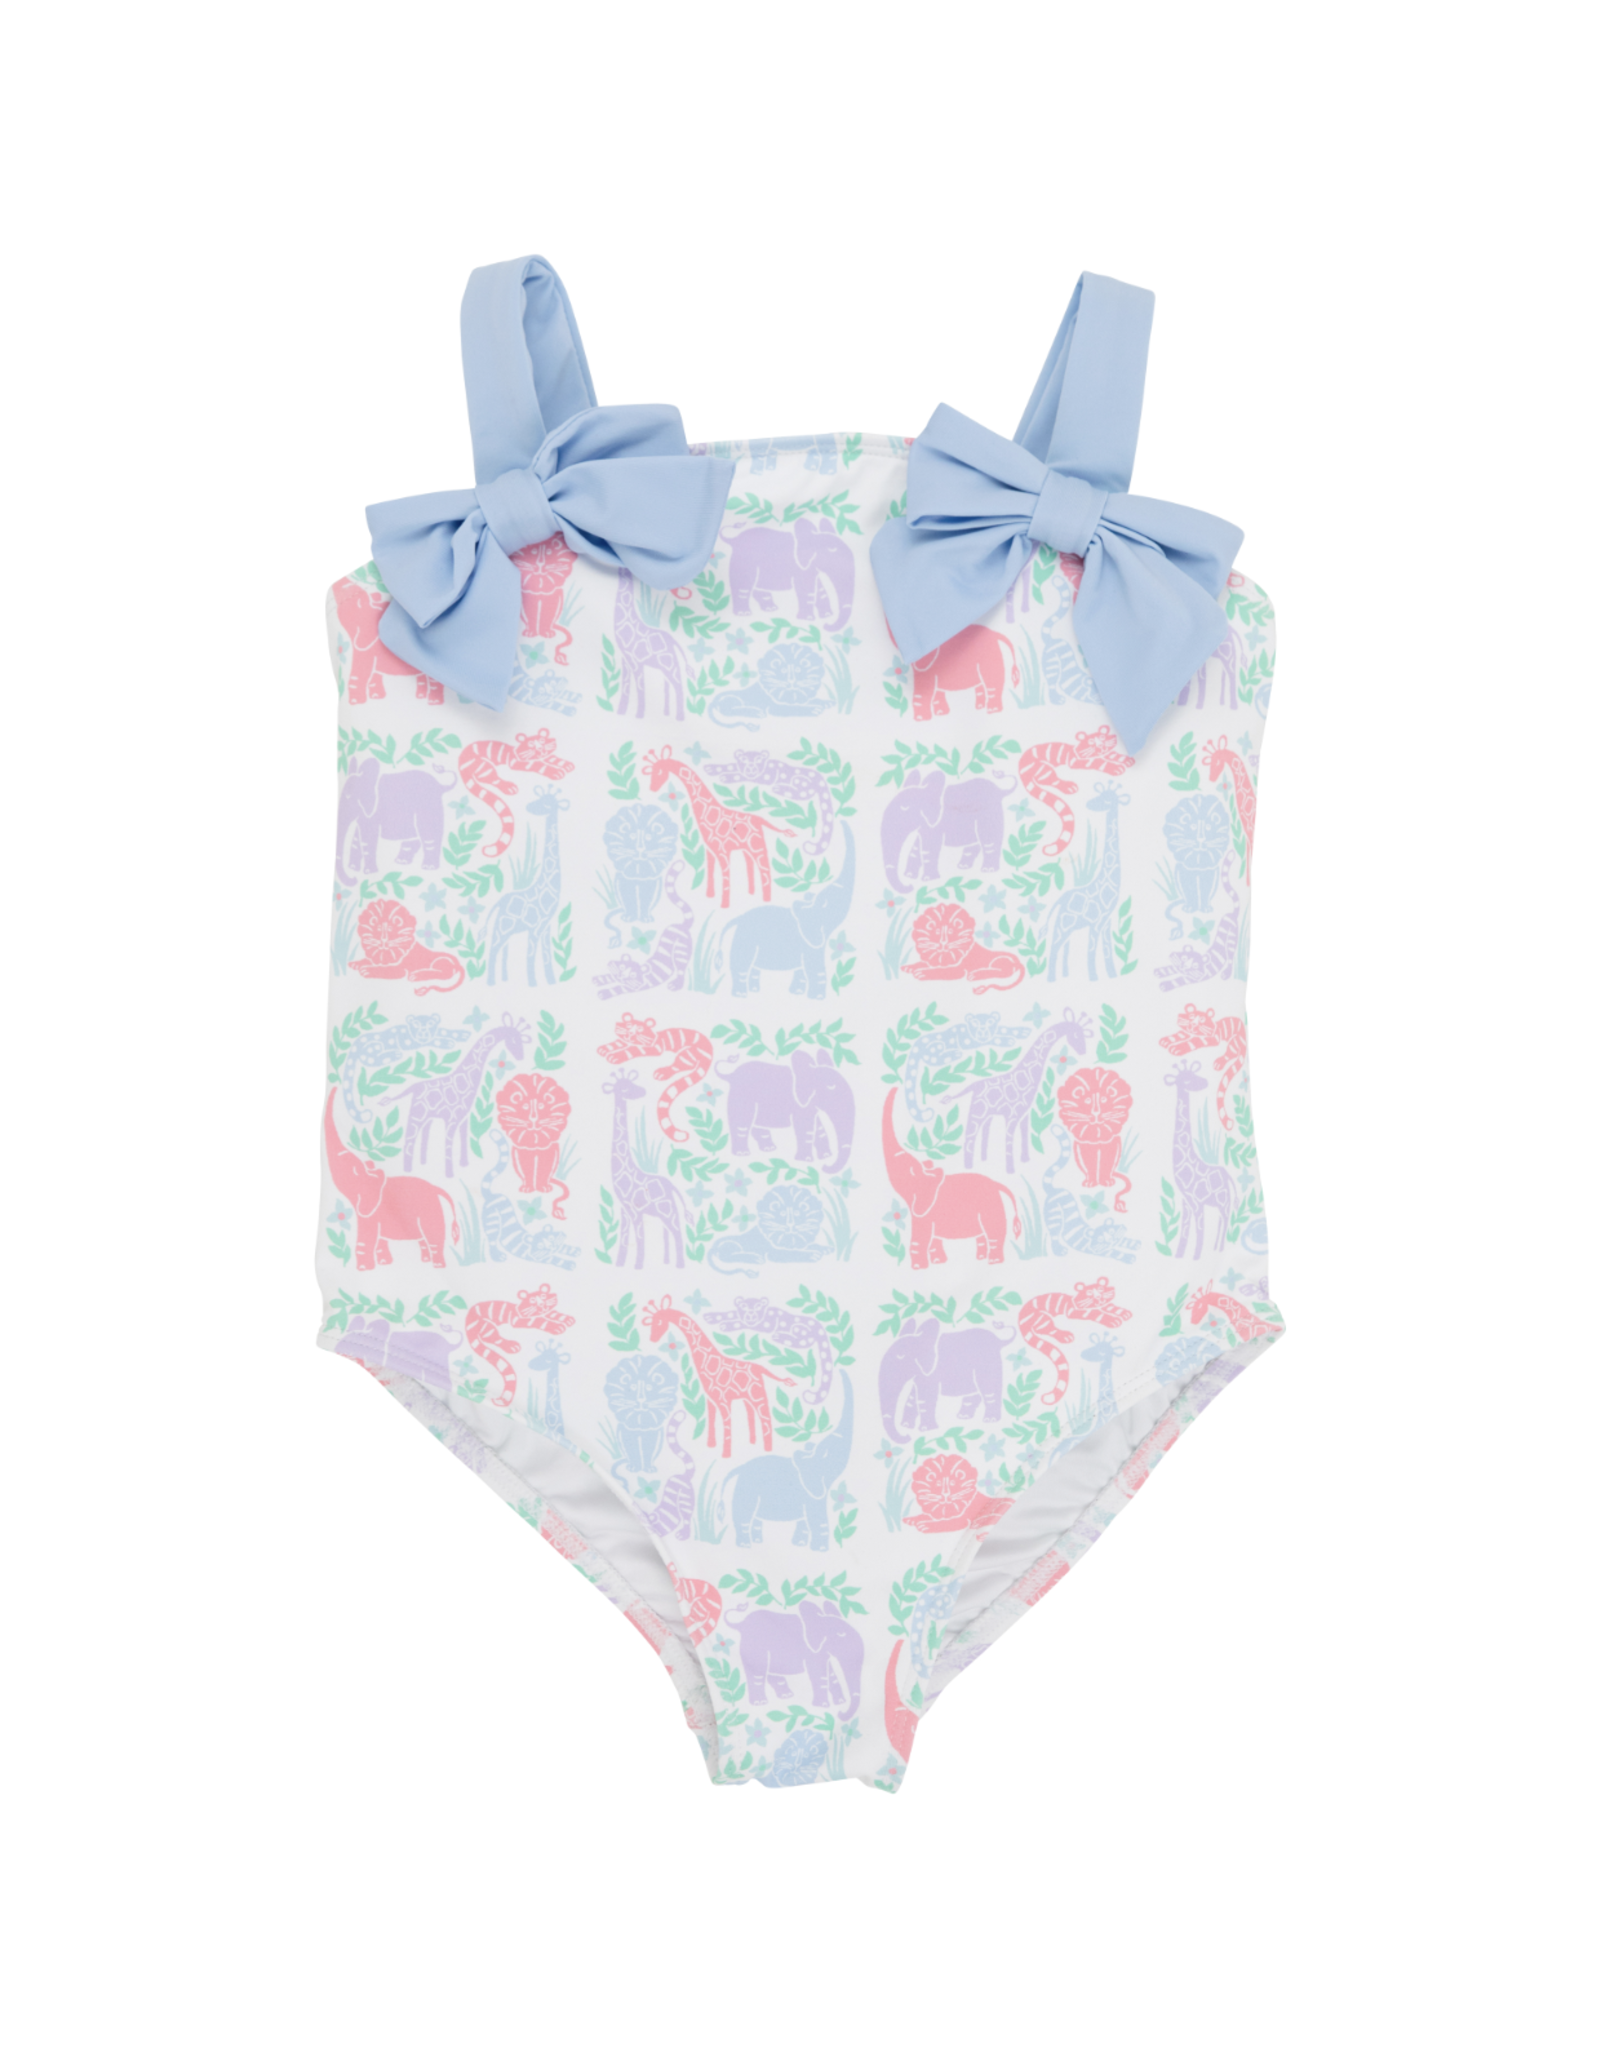 TBBC Shannon Bow Bathing Suit Two by Two Hurrah